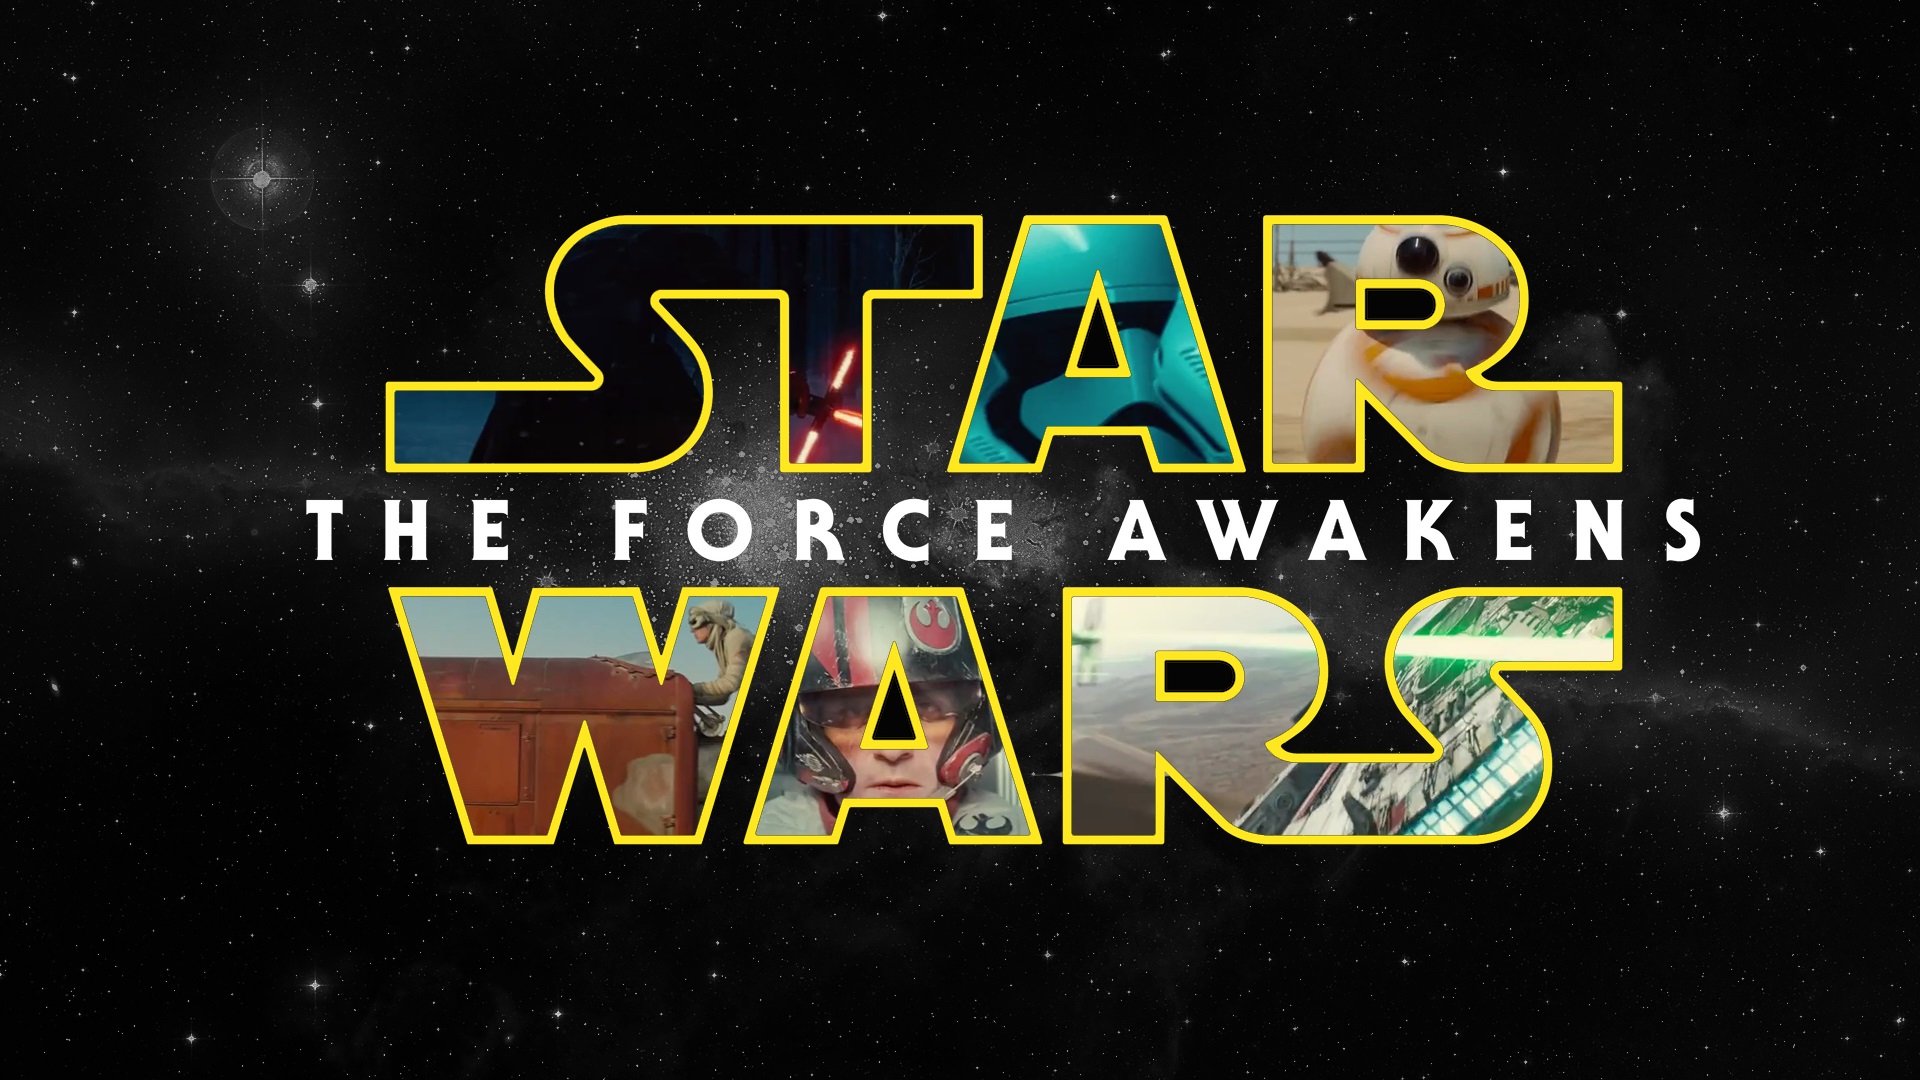 the saga of star wars back again with star wars the awakening of force